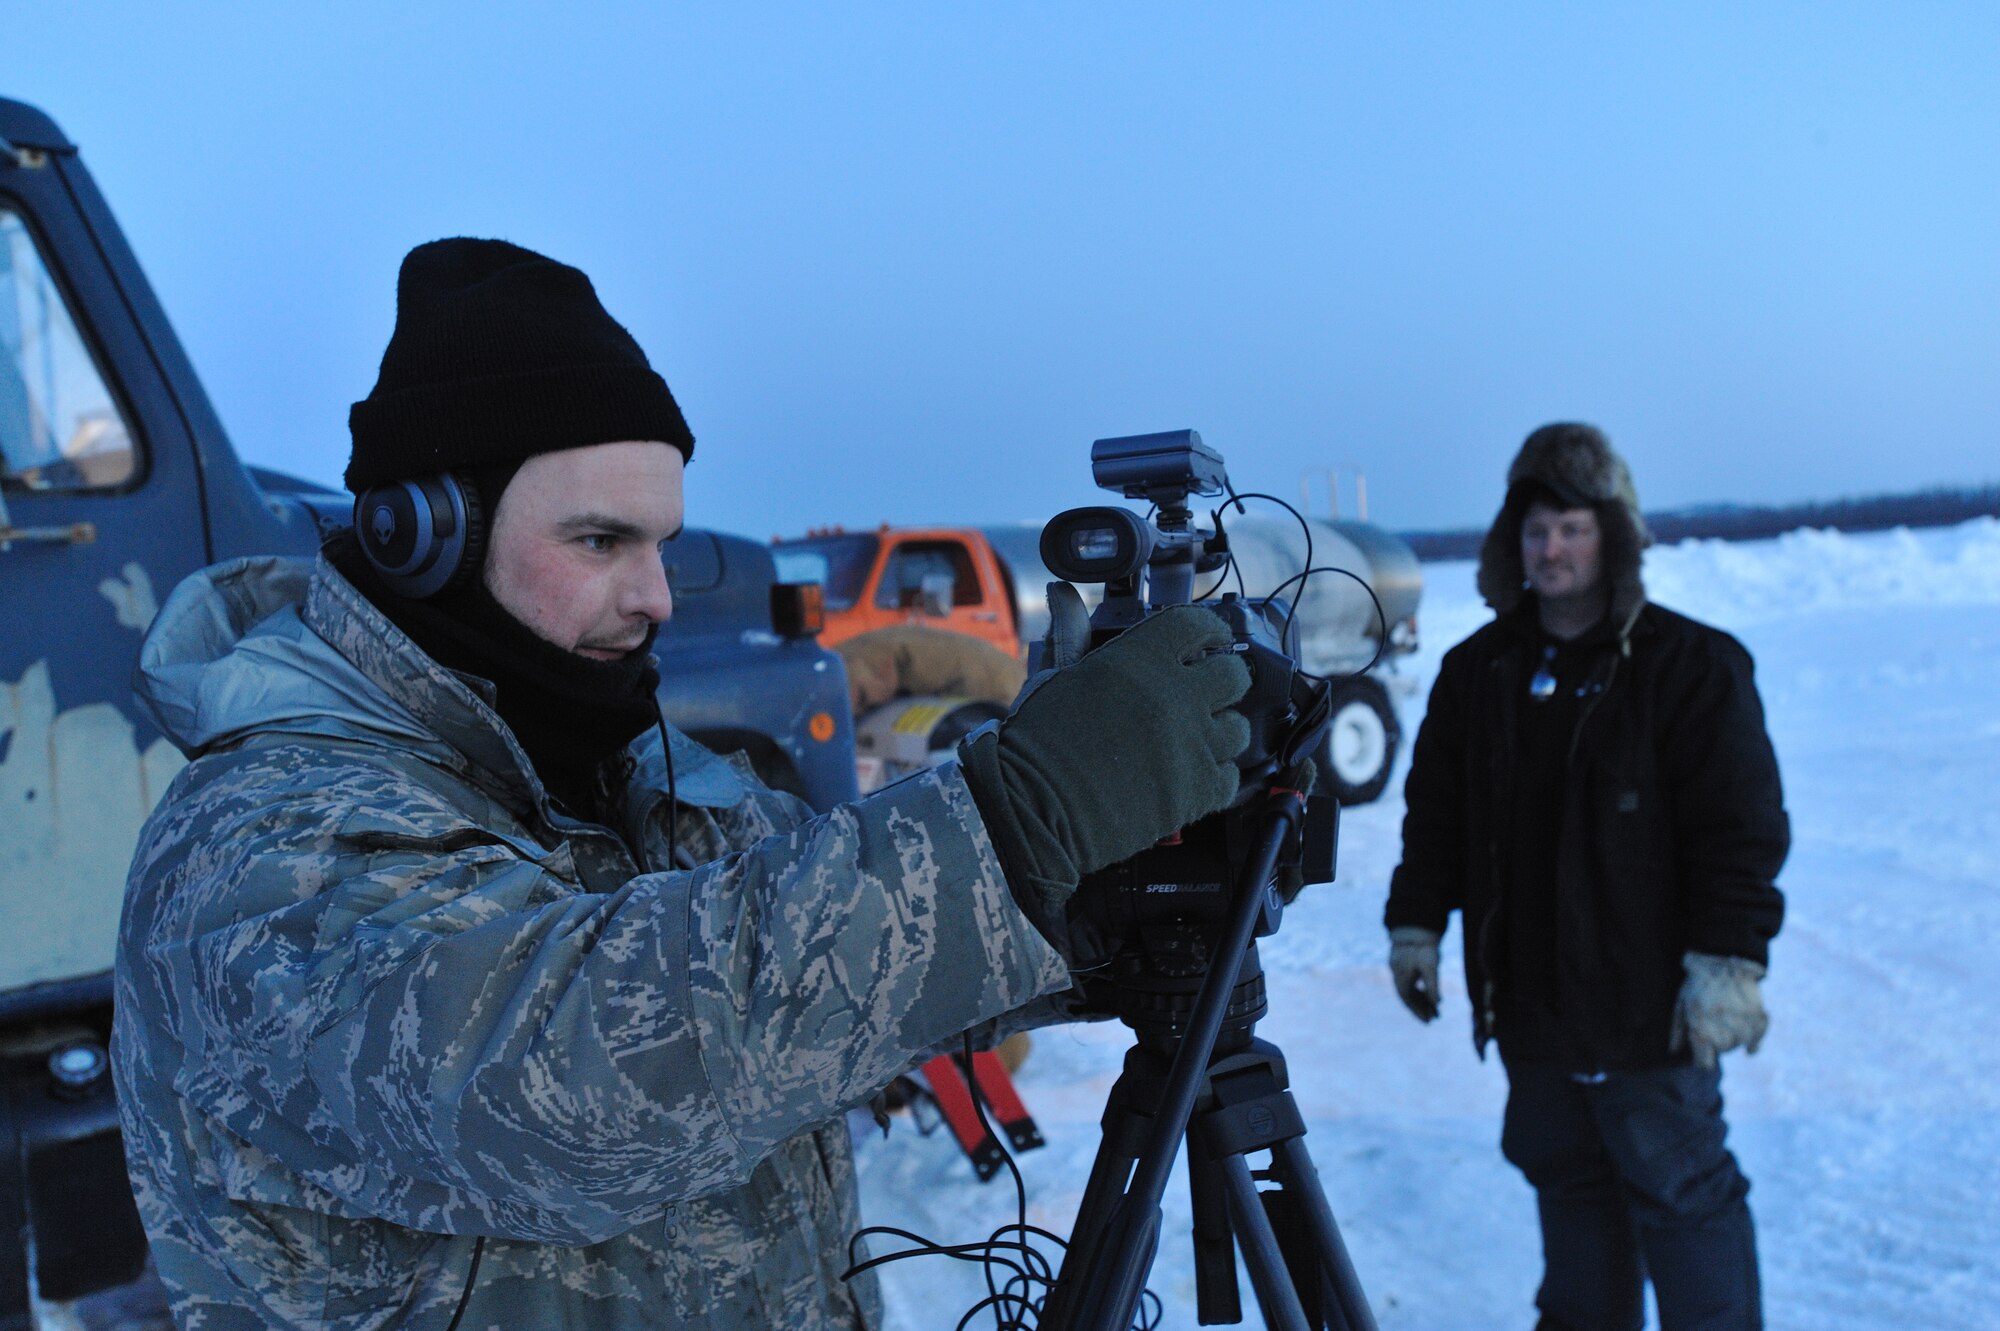 GALENA, Alaska-- Staff Sgt. Mark Leahy, 3rd Wing, sets up his video equipment for an interview with Dave Vandergriff a Marsh Creek LLC employee on the Yukon River, March 17. Marsh Creek LLC, a contractor for the 611th Civil Engineer Squadron, is building an ice bridge to move supplies for demolition of the former Kalakaket Creek Radio Relay Station that is located 310 miles northwest of Anchorage. The station was built in 1957 and was used to transfer defense communications between White Alice Communication Systems up for demolition because of satellite technology in mid 1970s. (U.S. Air Force photo by Senior Airman Jonathan Steffen)